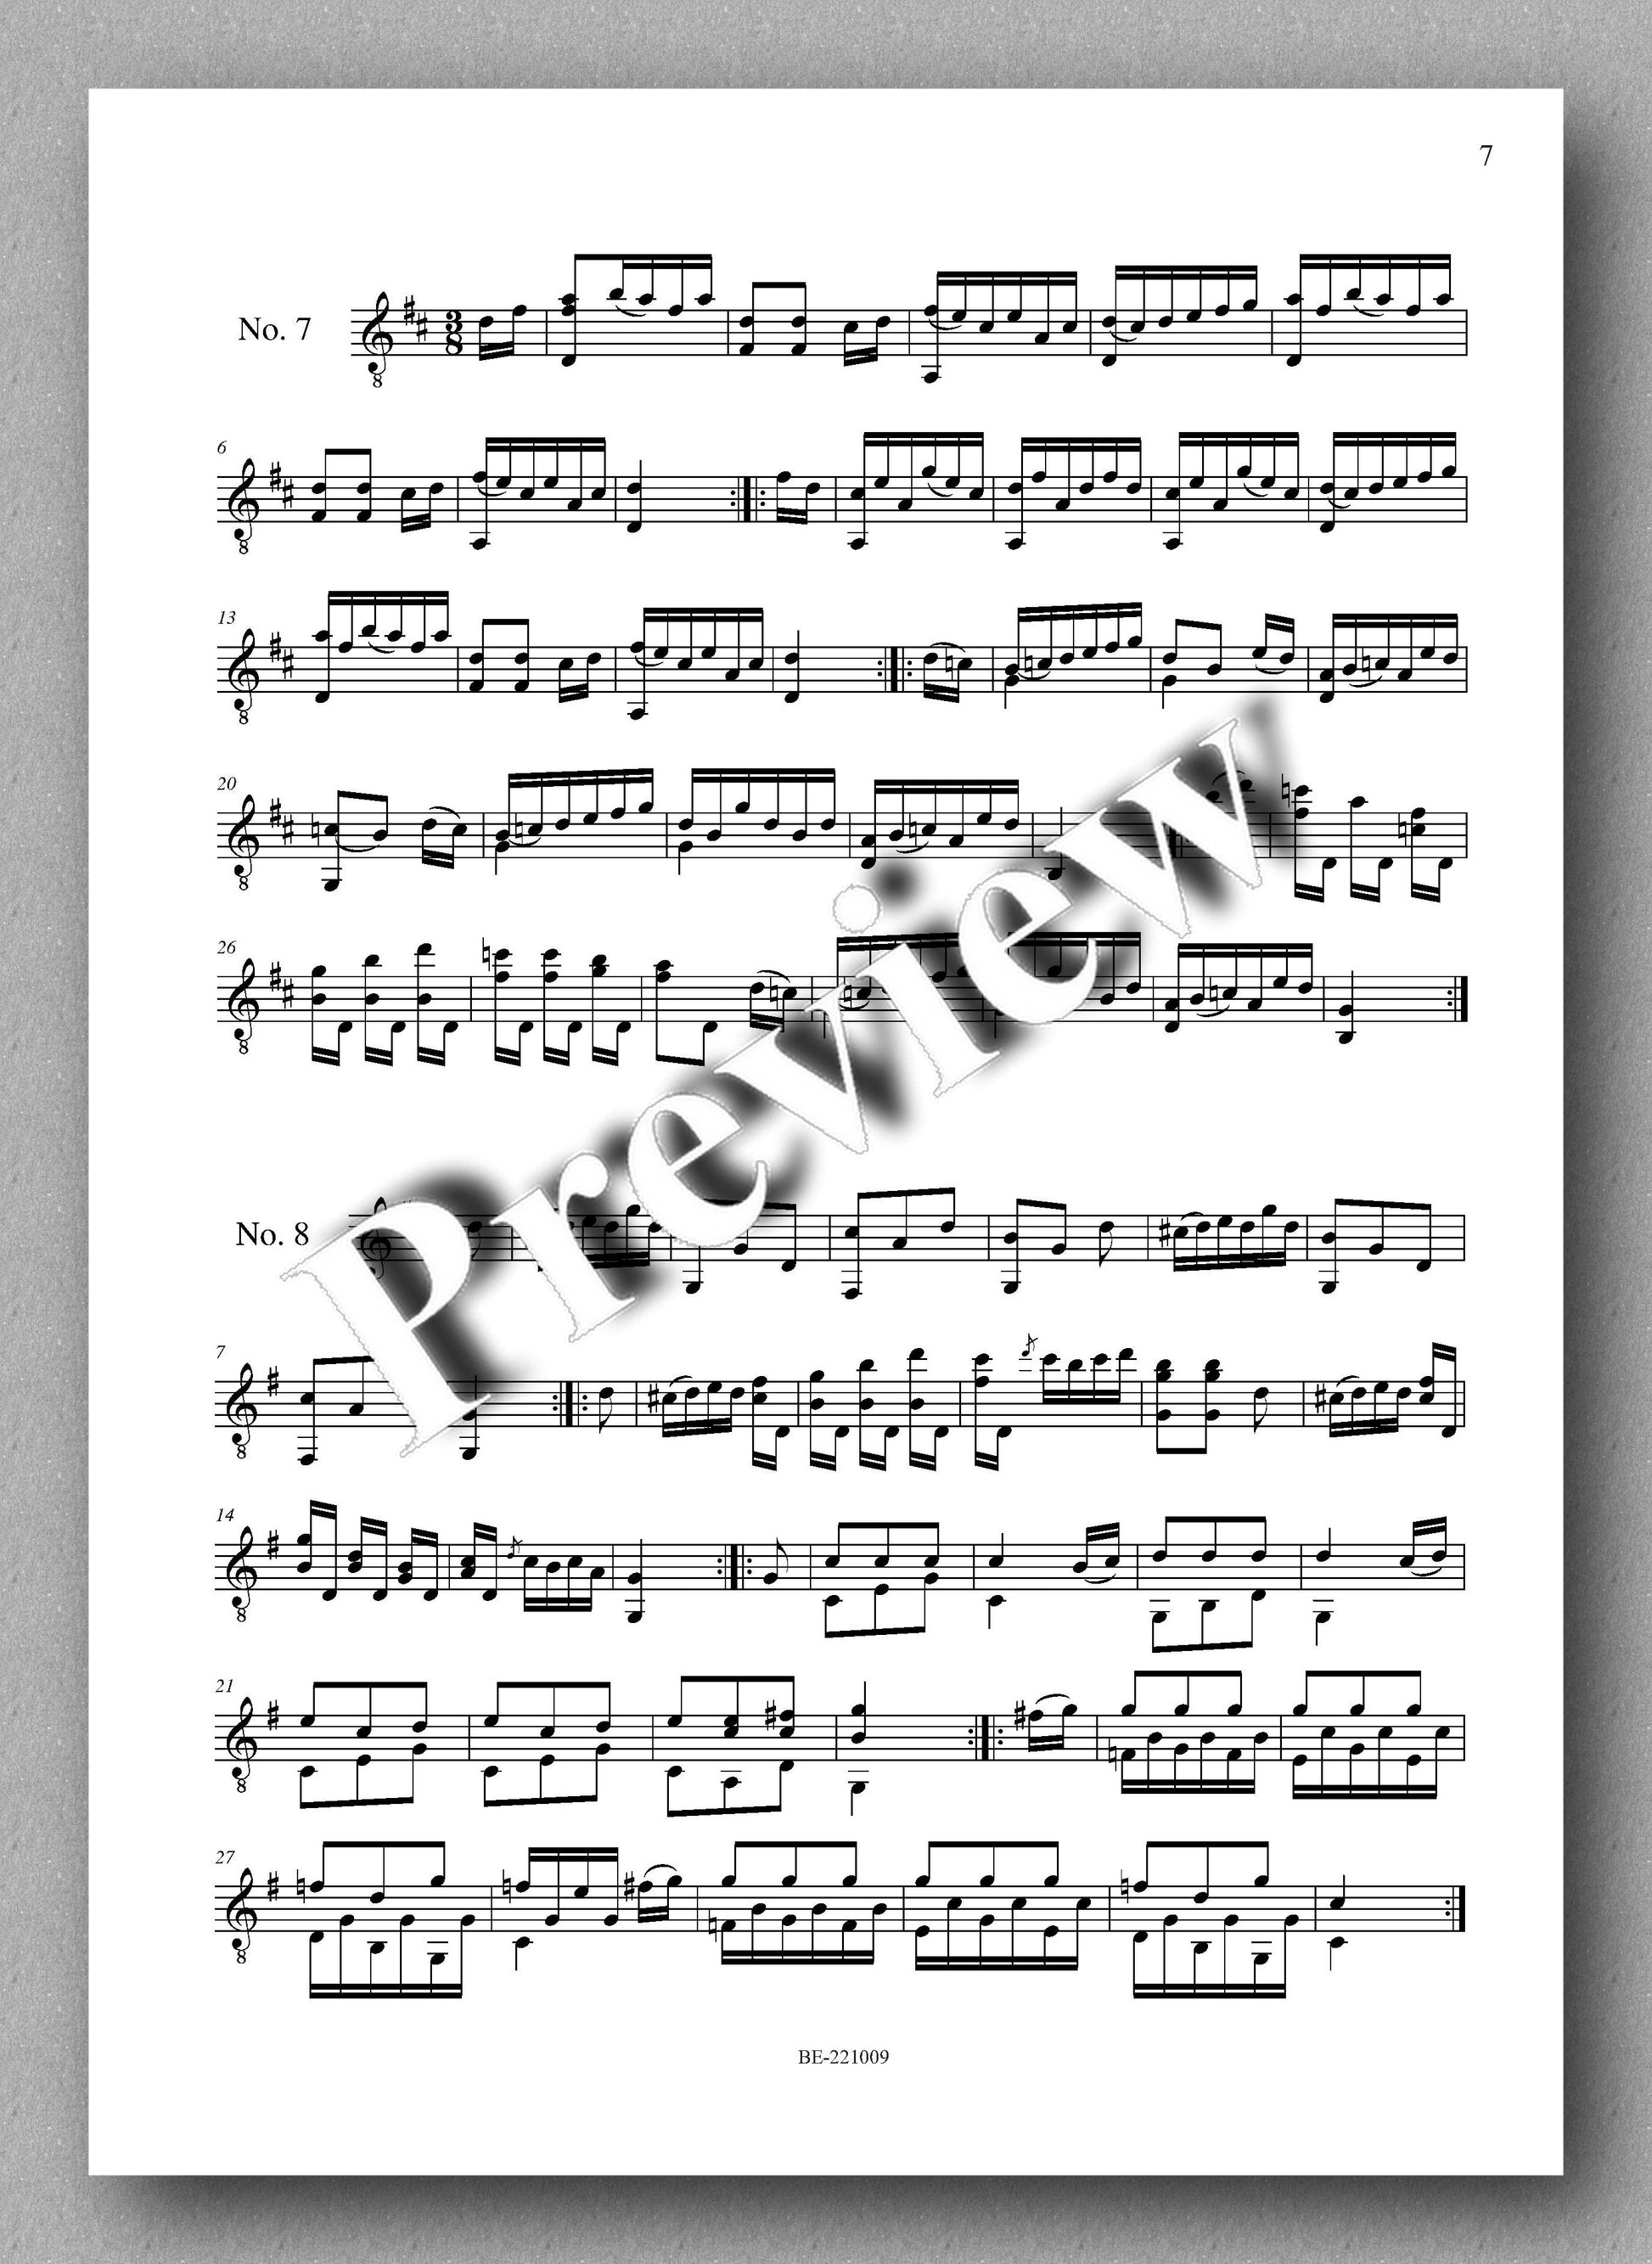 Molino, Collected Works for Guitar Solo, Vol. 5 - preview of the music score 2